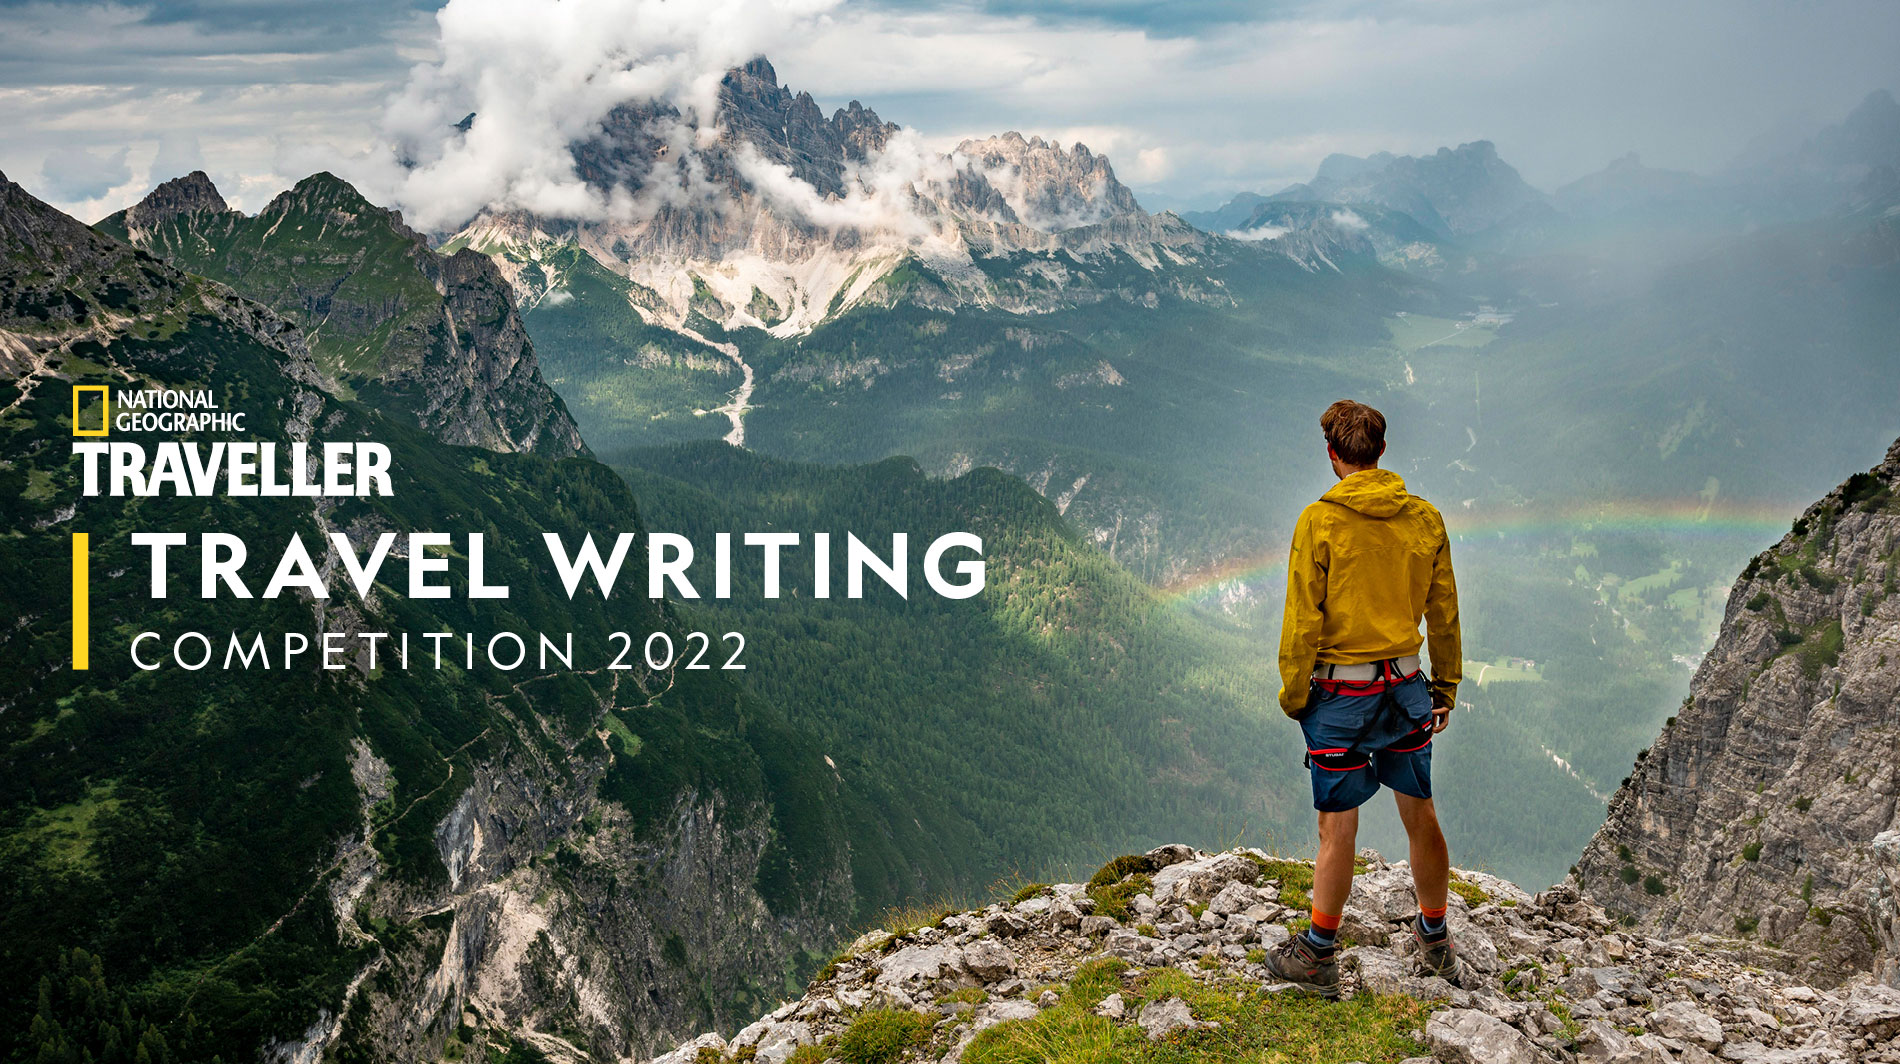 The National Geographic Traveller (UK) Travel Writing Competition 2022.